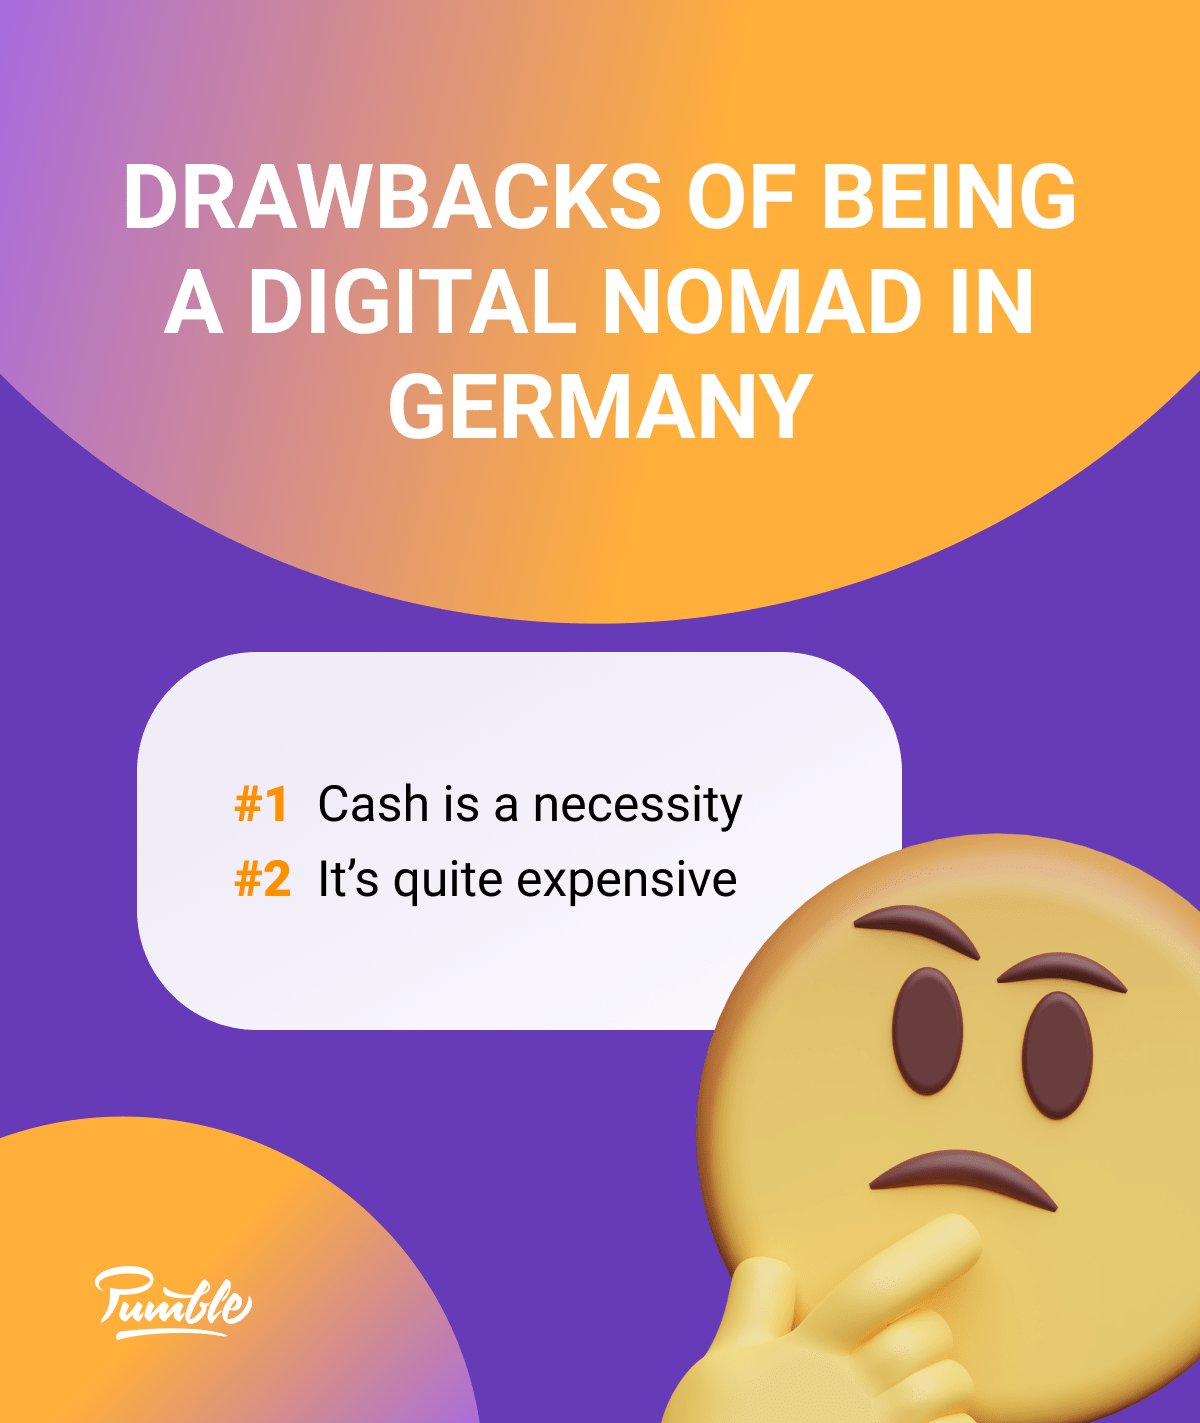 Drawbacks of being a digital nomad in Germany